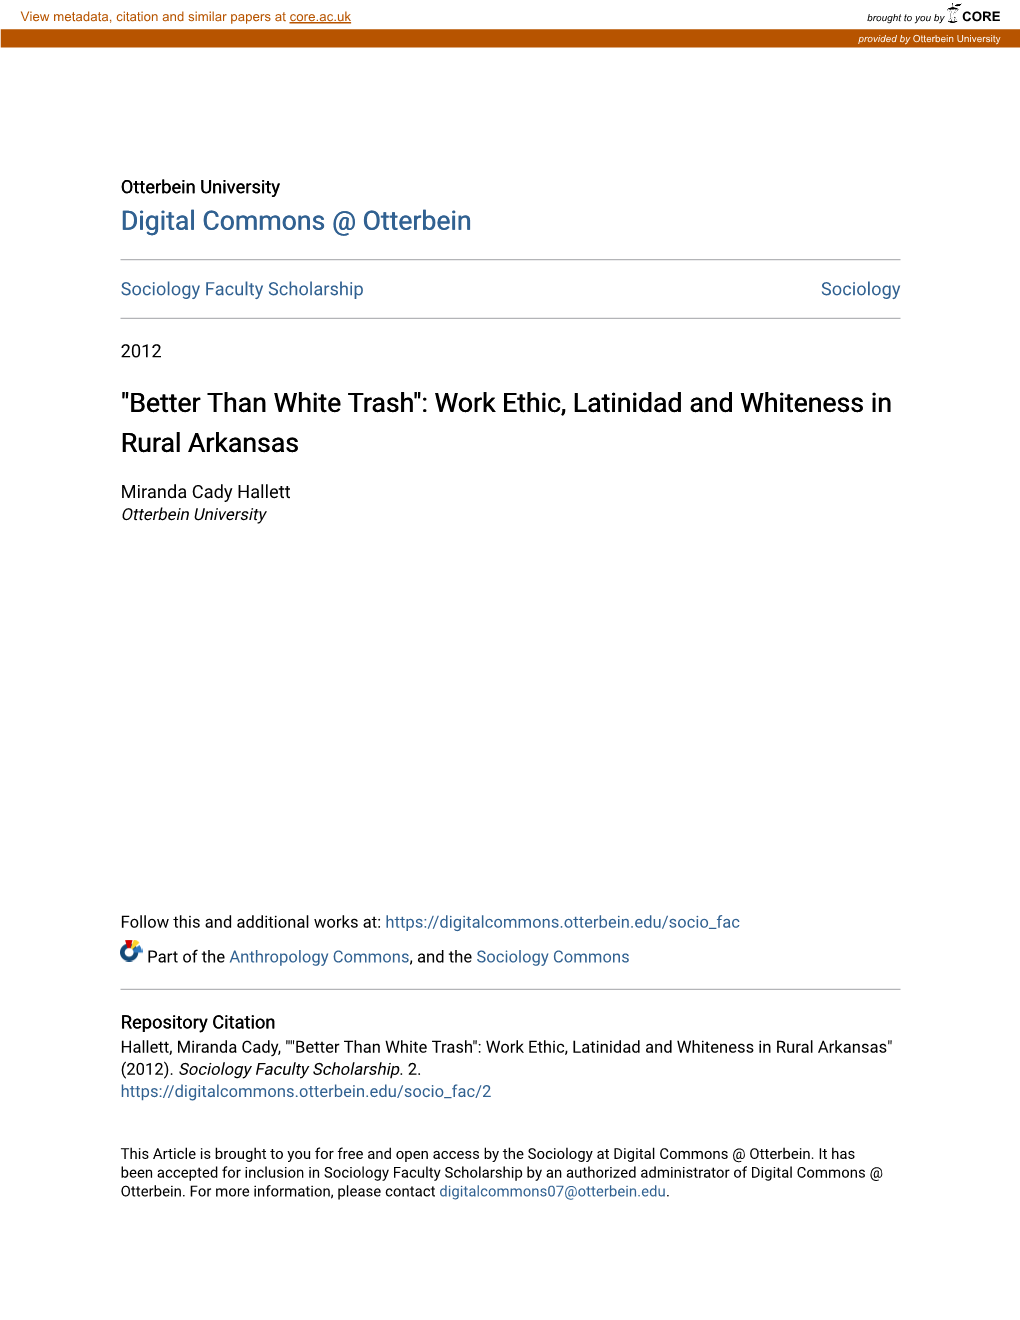 Better Than White Trash": Work Ethic, Latinidad and Whiteness in Rural Arkansas